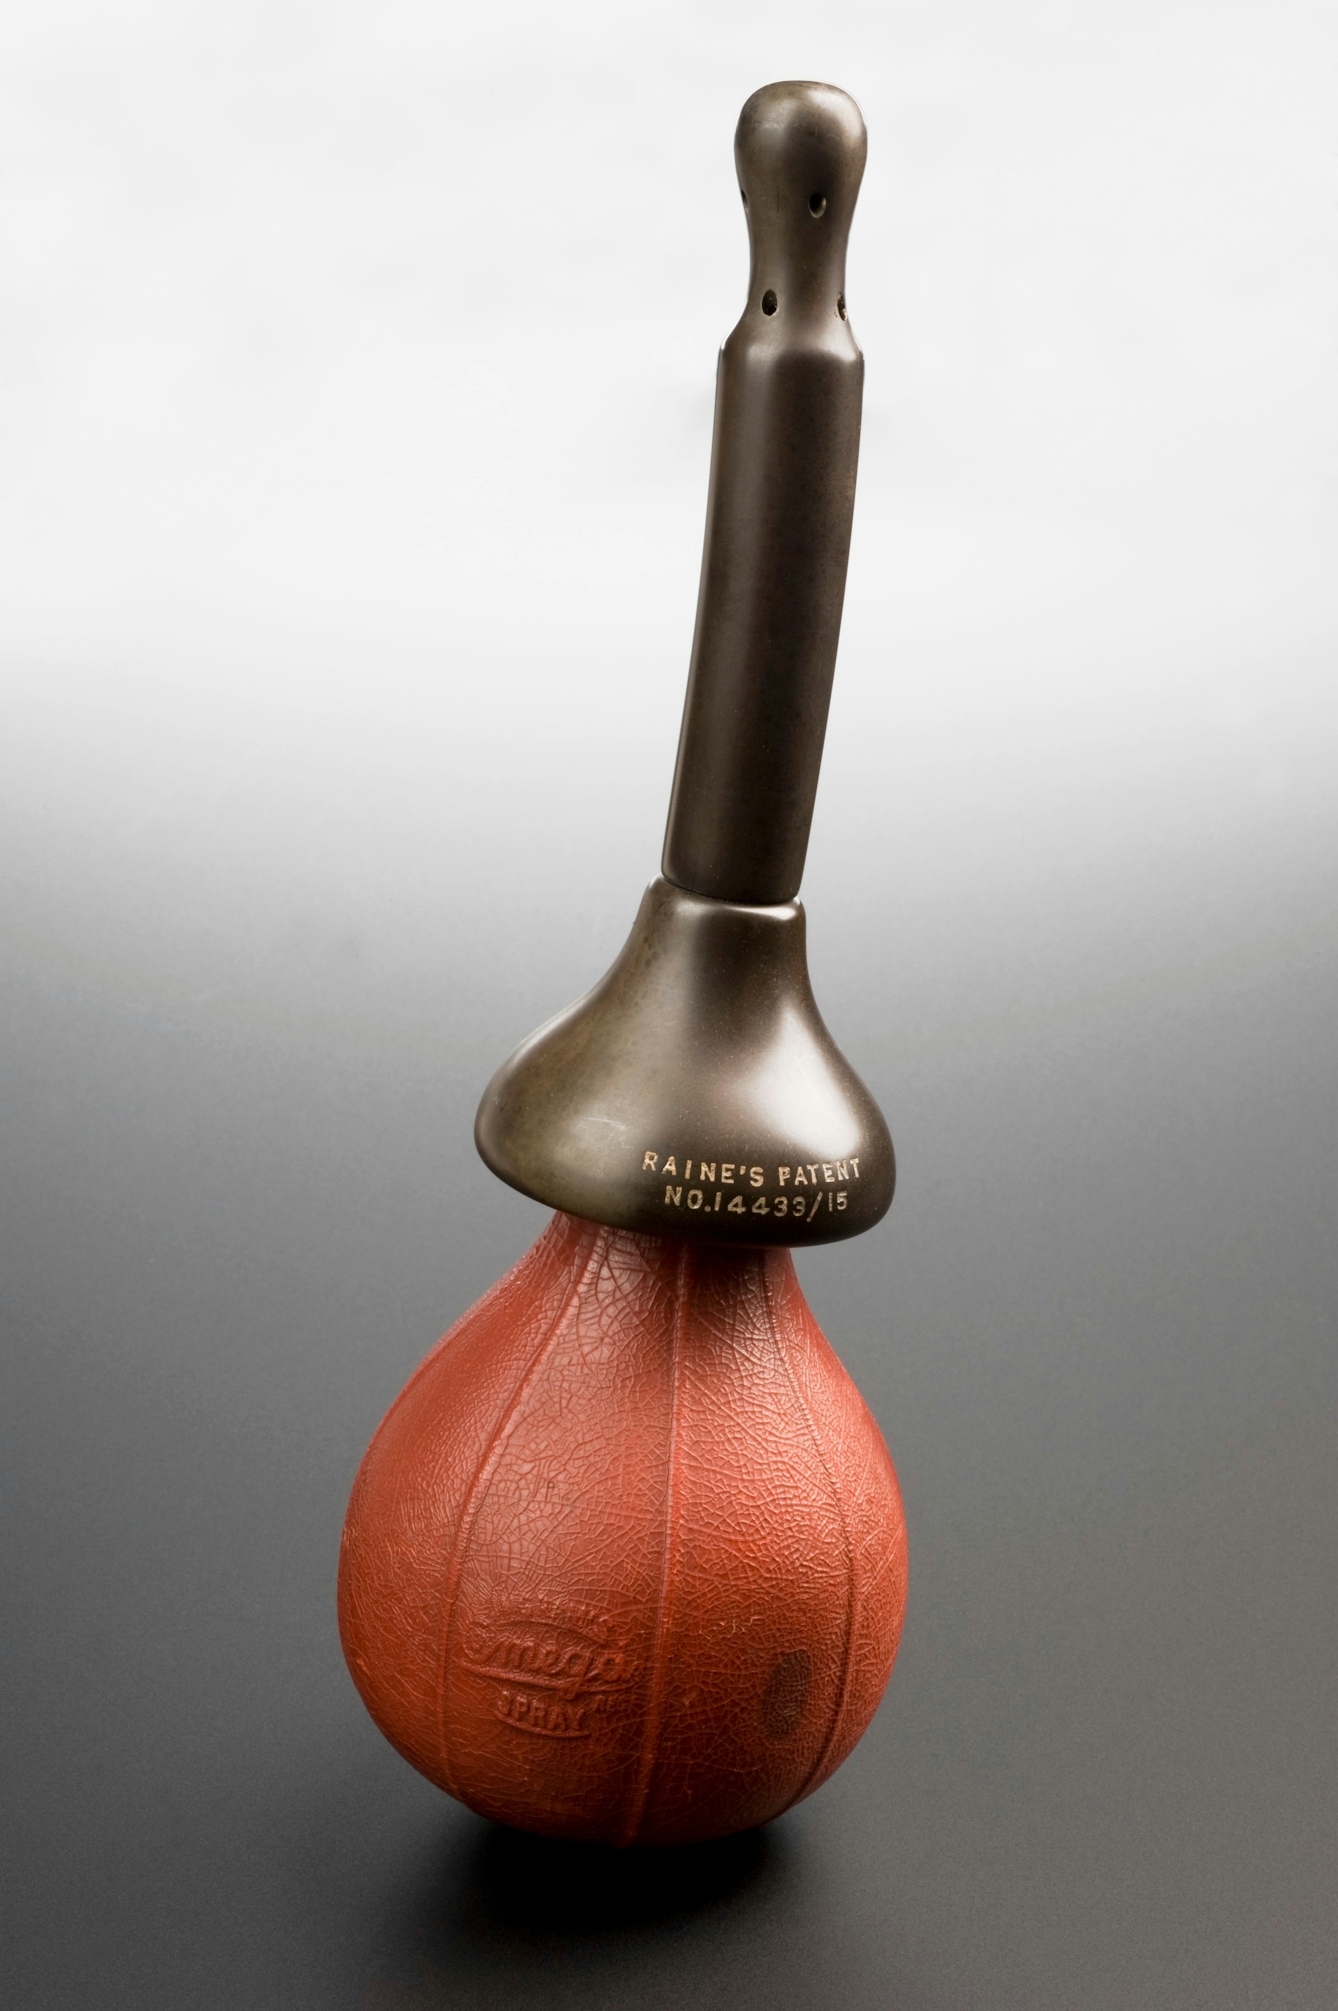 Photograph of a vaginal douche made out of rubber and vulcanite, the 'Omega Spray', made by Ingram in England and patented by Raine, 1900-1940.